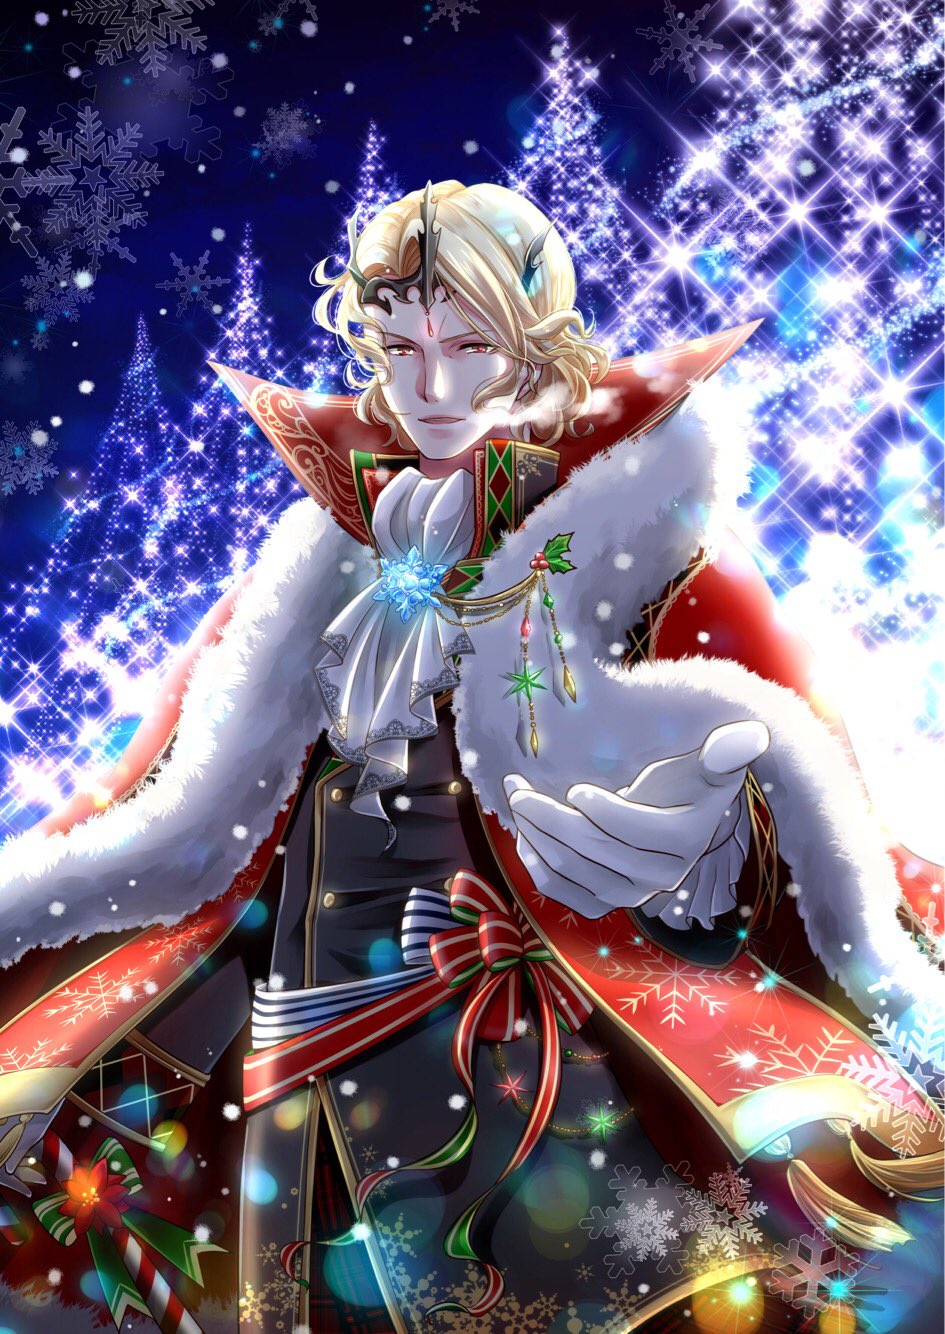 1boy armor blonde_hair european_clothes fire_emblem fire_emblem_if fur_coat highres jewelry kaboplus_ko looking_at_viewer male_focus marx_(fire_emblem_if) offering_hand smile snow snowflakes solo_focus tiara